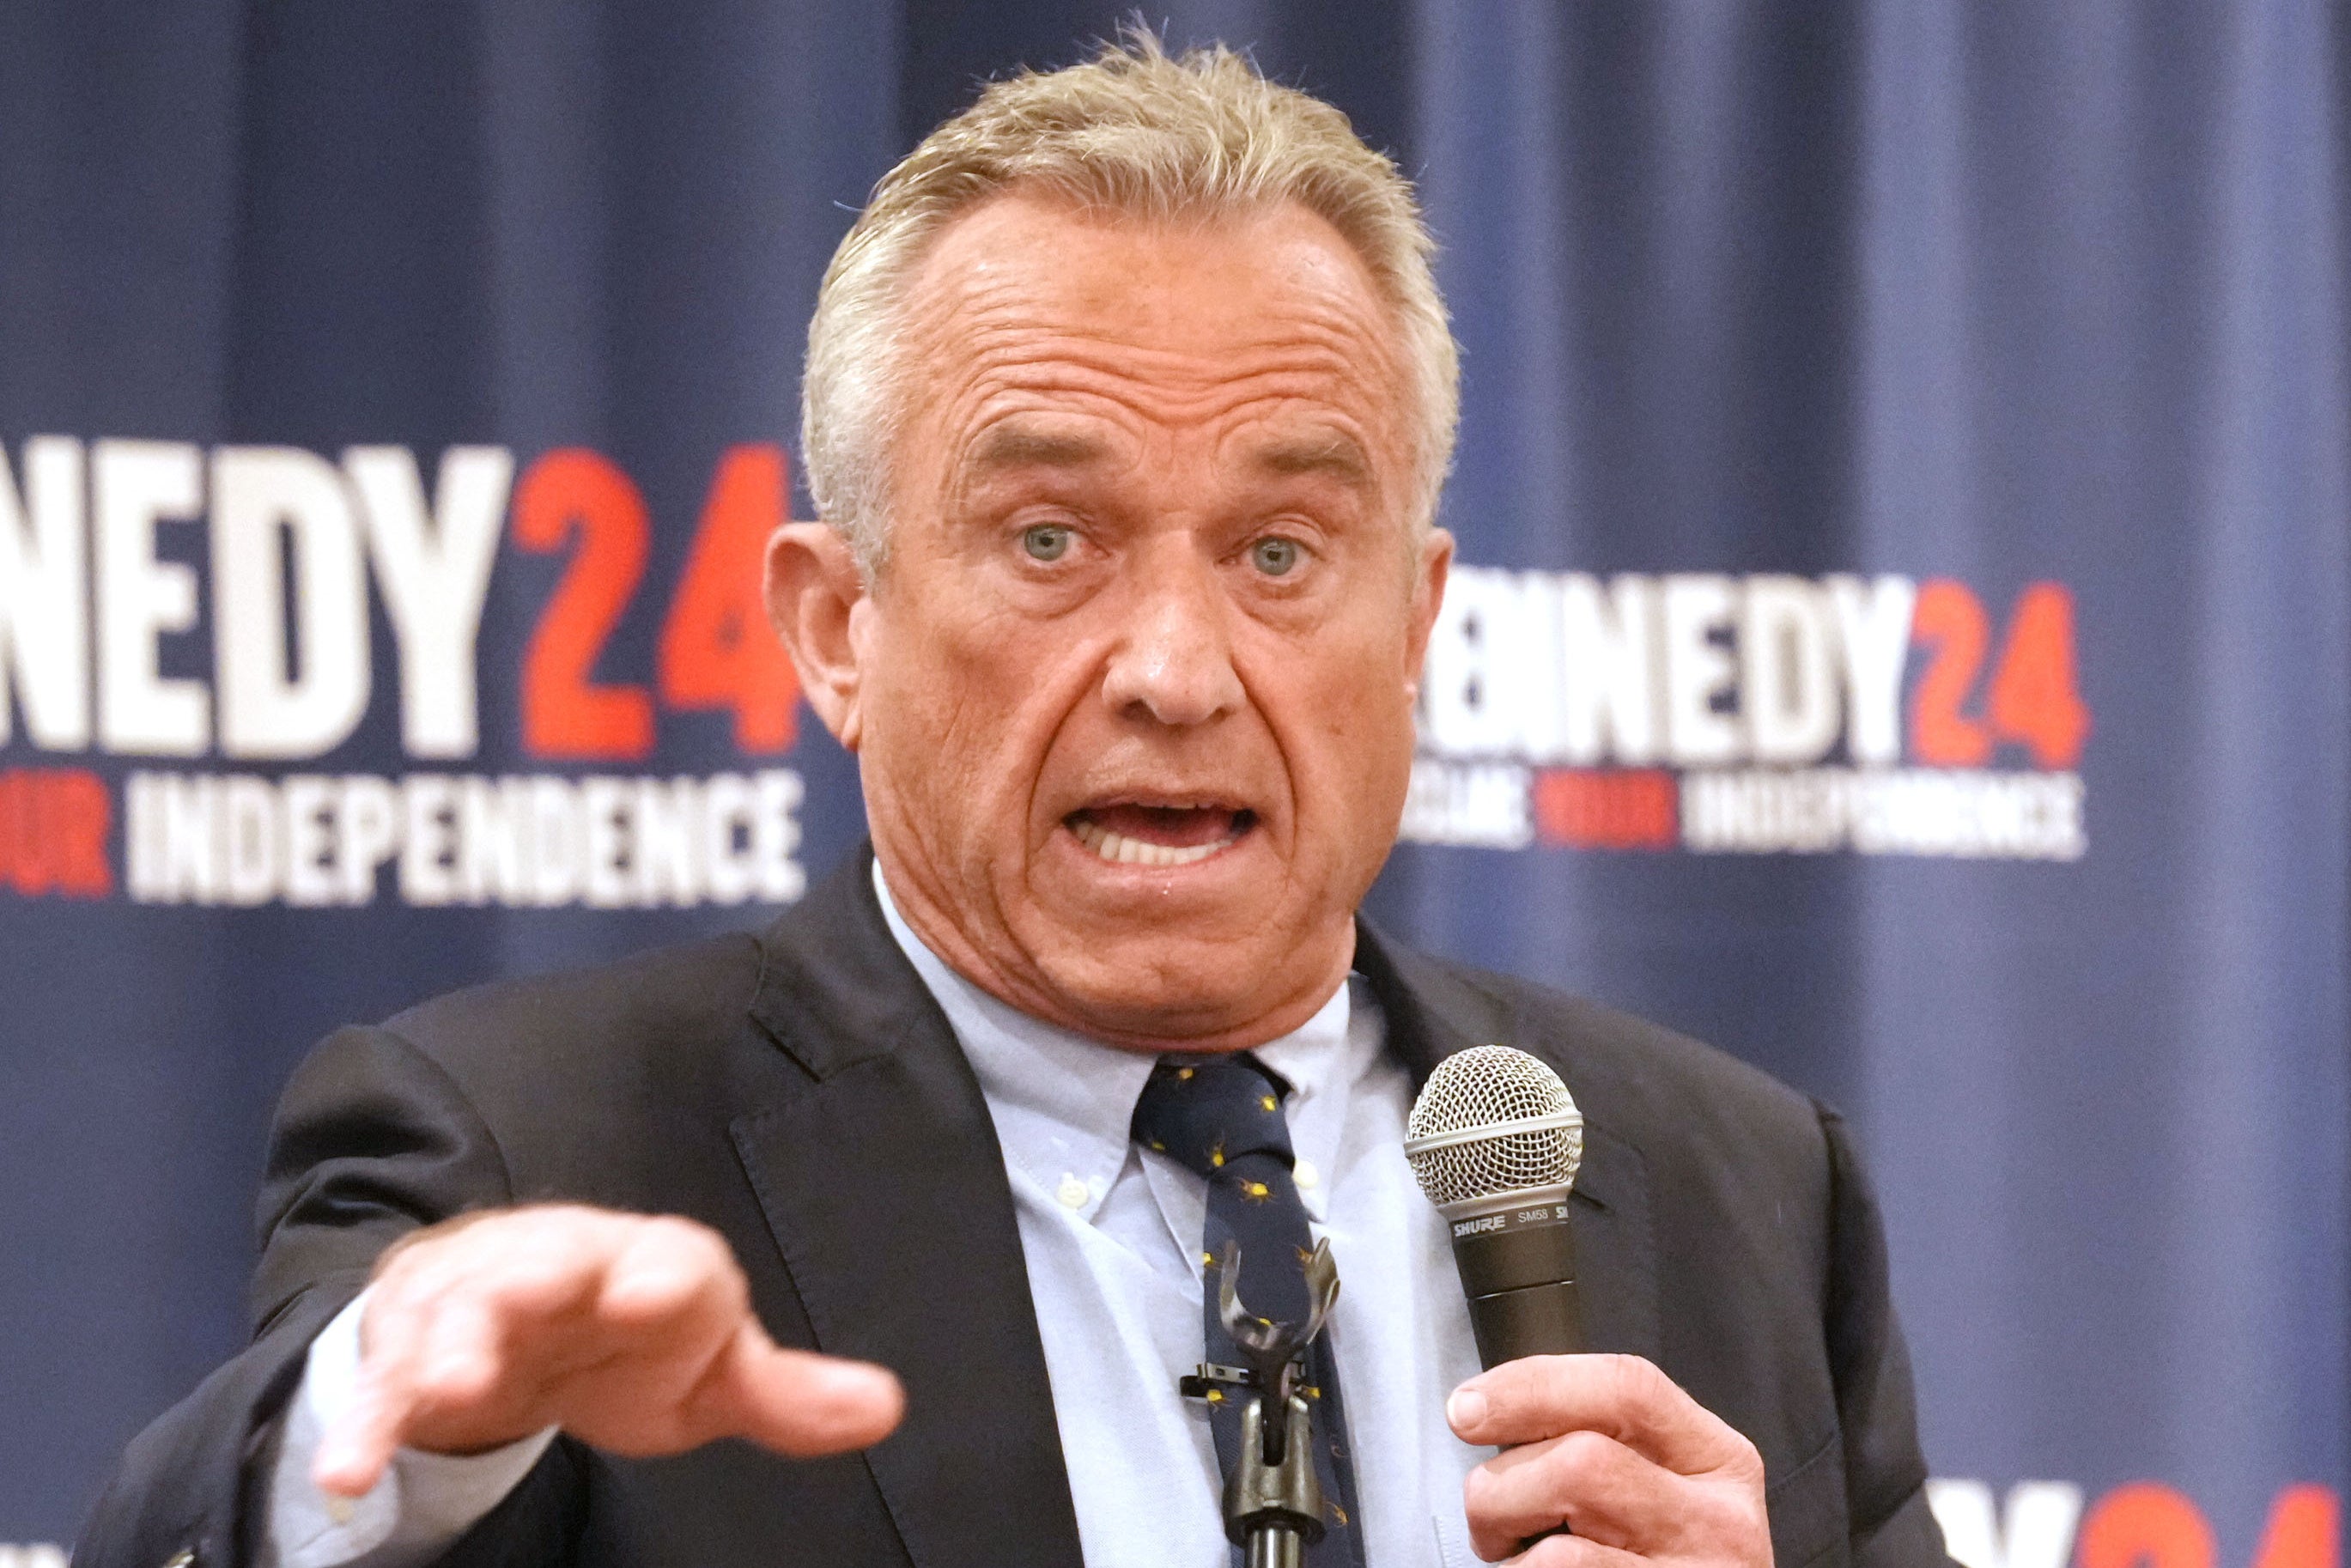 Robert F. Kennedy Jr., who is running as an independent candidate for President of the United States, said he wants to put the US budget on blockchain